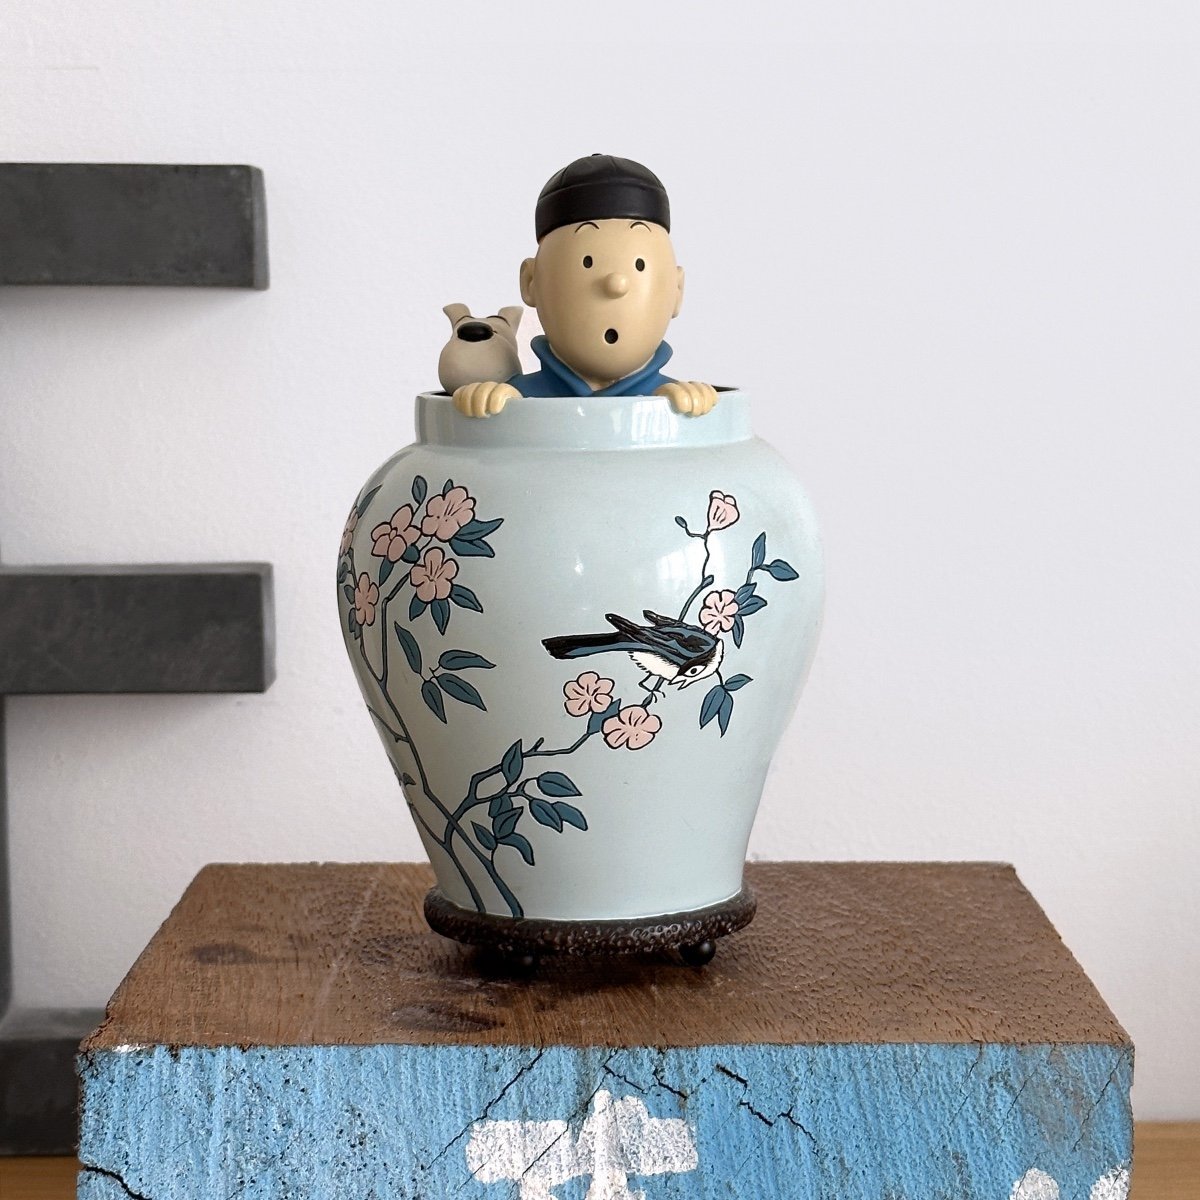  Tintin - La Potiche - Resin Figurine - Mythical Images - 17cm